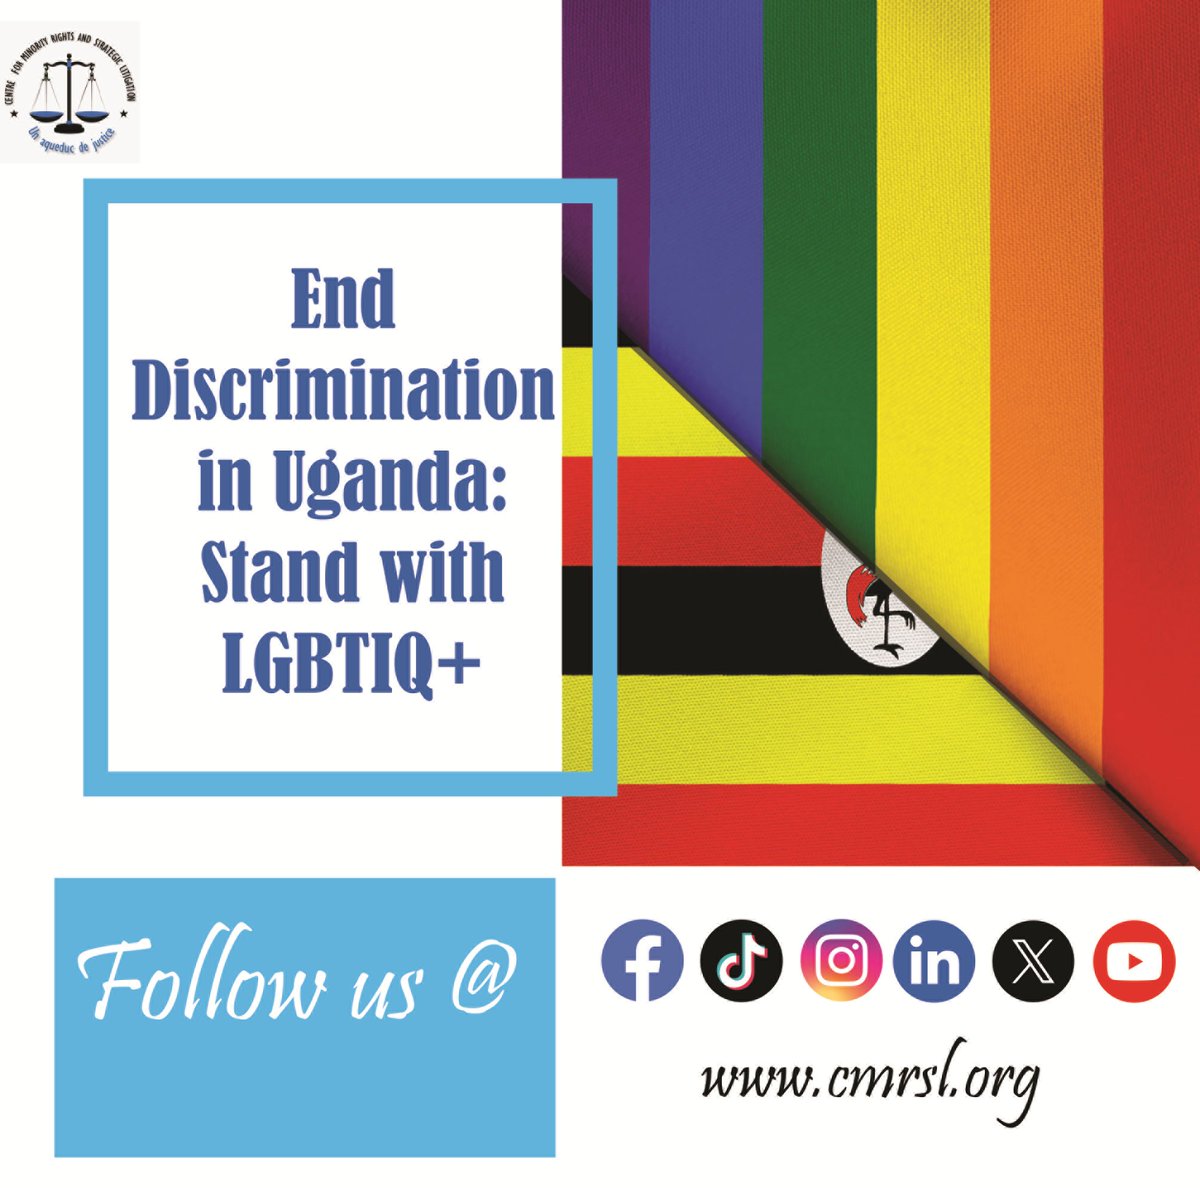 1/1 We stand in unwavering solidarity with the LGBTIQ community in Uganda. The High Court's refusal to strike down the discriminatory Anti-LGBTQ+ Bill, coupled with the recent rejection of SMUG's petition for registration by Ugandan authorities, >>>